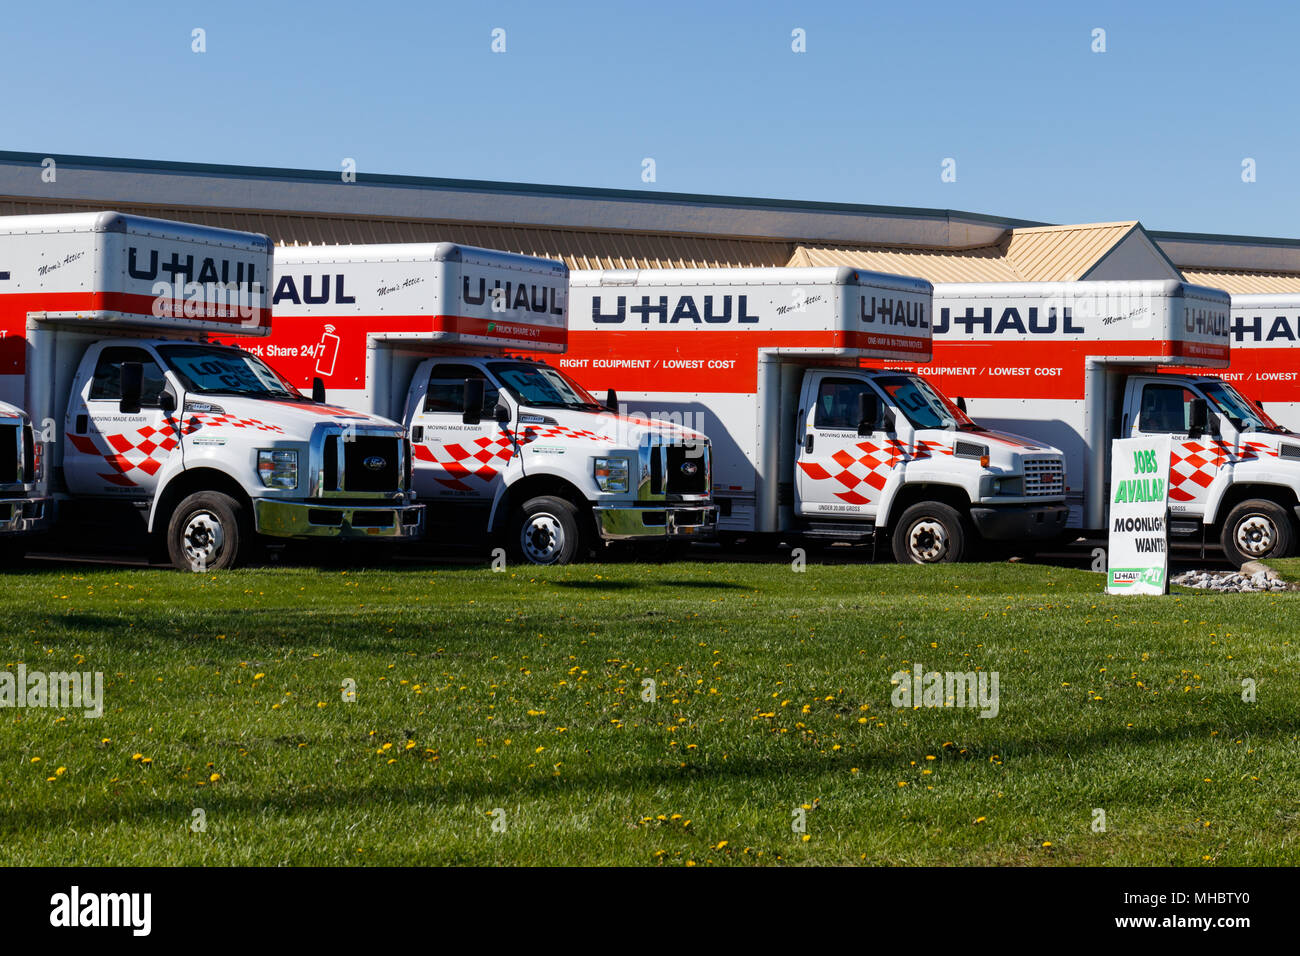 Lafayette - Circa April 2018: U-Haul Moving Truck Rental Location. U-Haul offers moving and storage solutions III Stock Photo